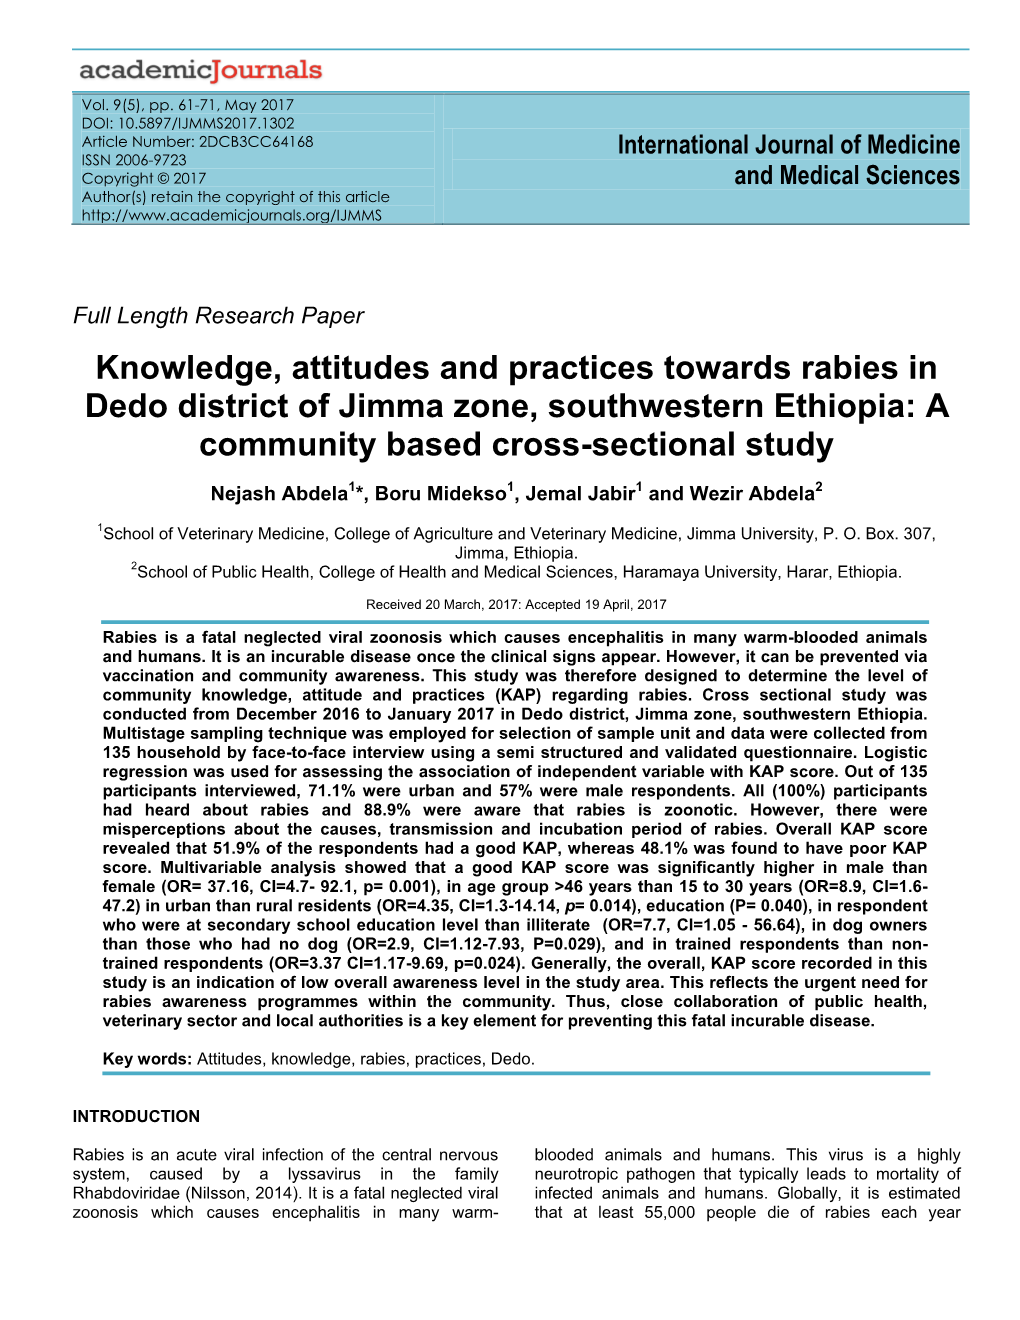 Knowledge, Attitudes and Practices Towards Rabies in Dedo District of Jimma Zone, Southwestern Ethiopia: a Community Based Cross-Sectional Study